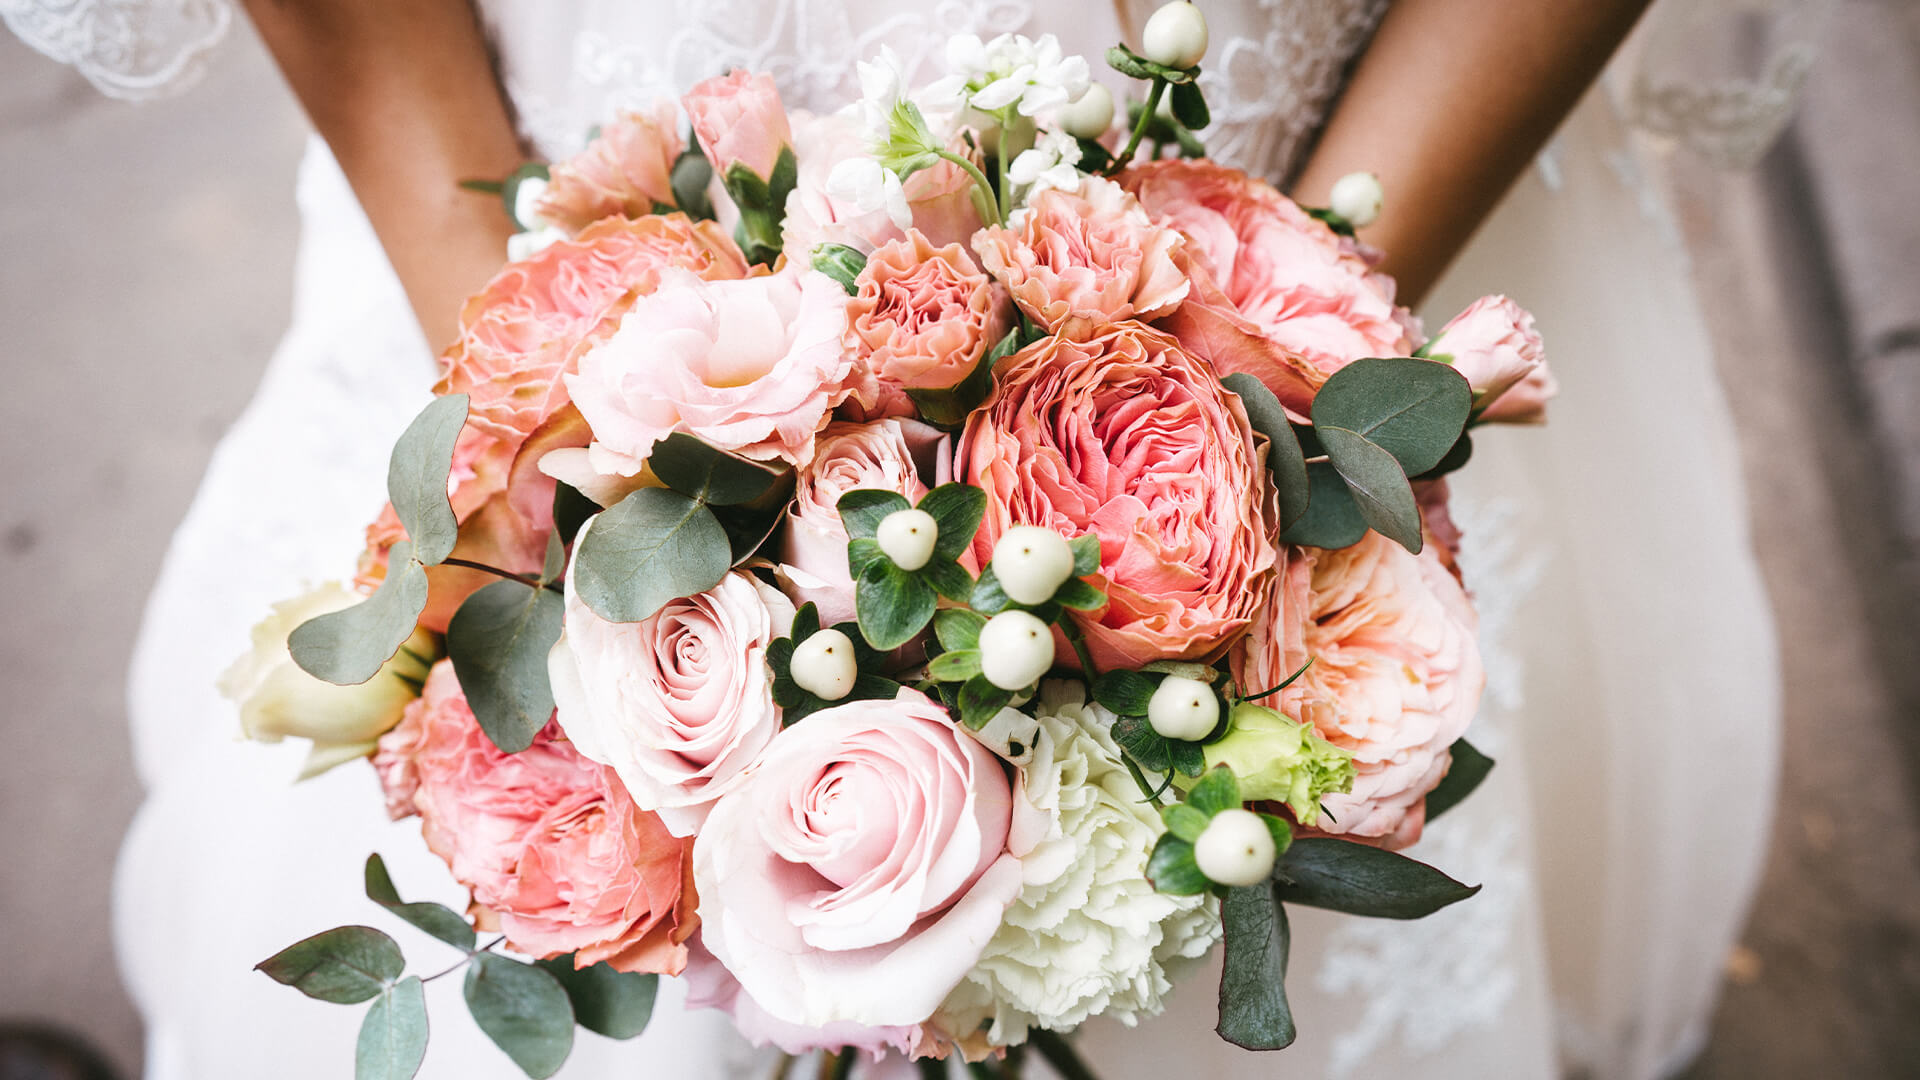 Exploring the Role of Flowers in Global Wedding Traditions